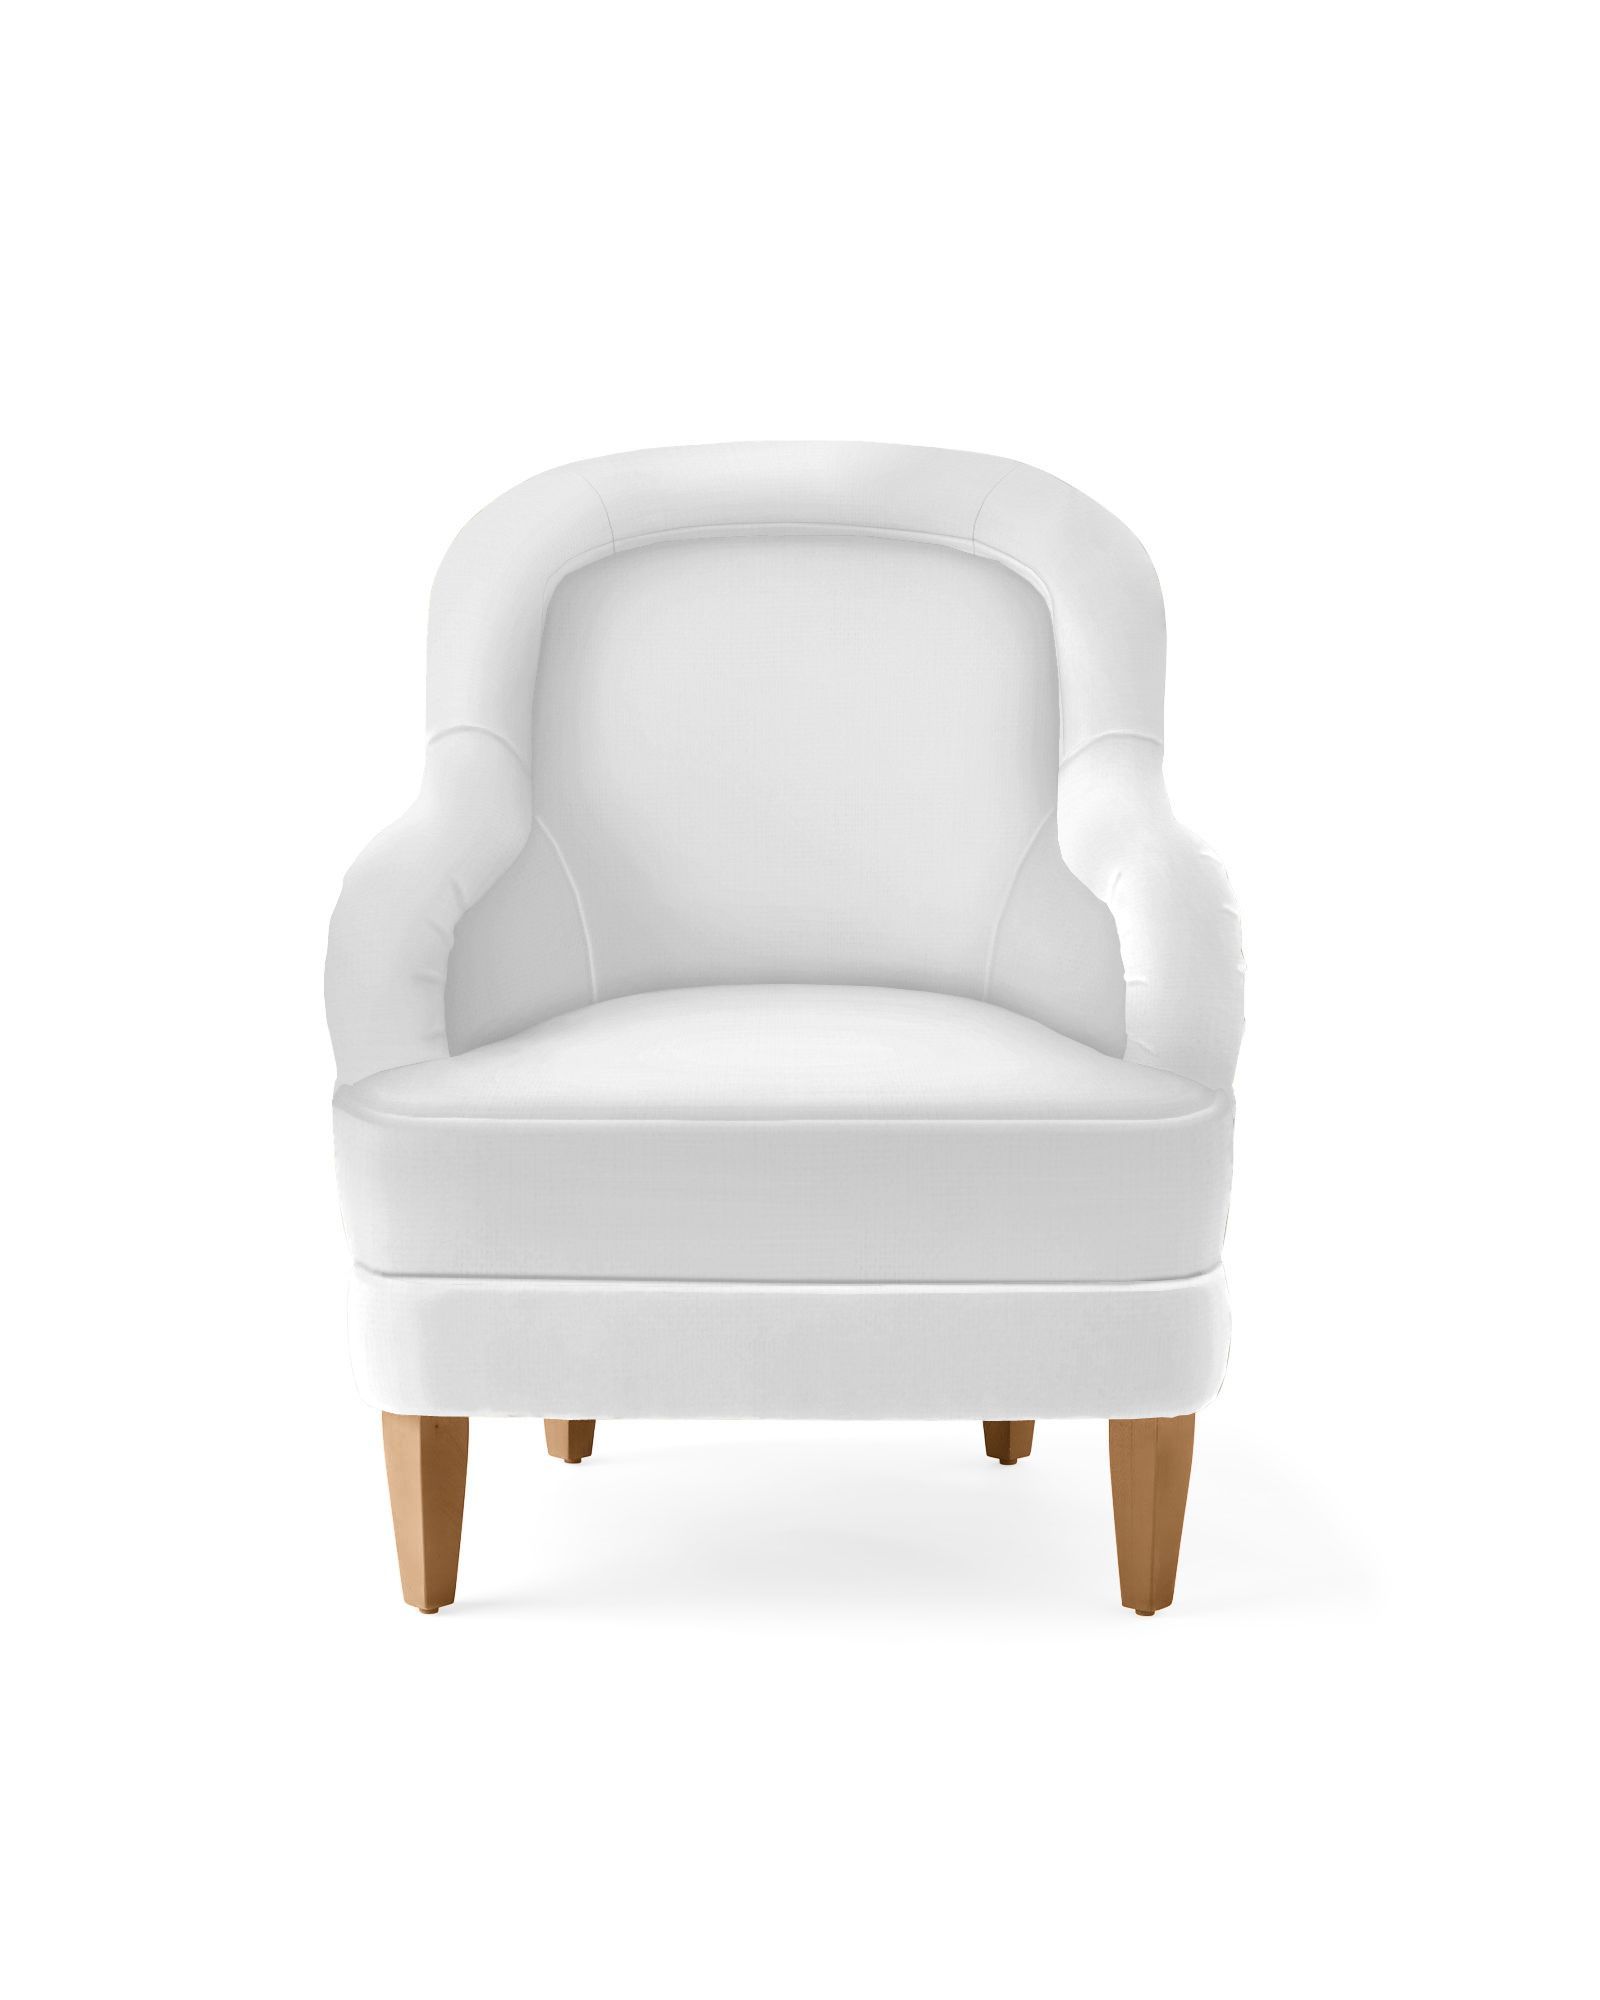 Wallis Slipper Chair | Serena and Lily